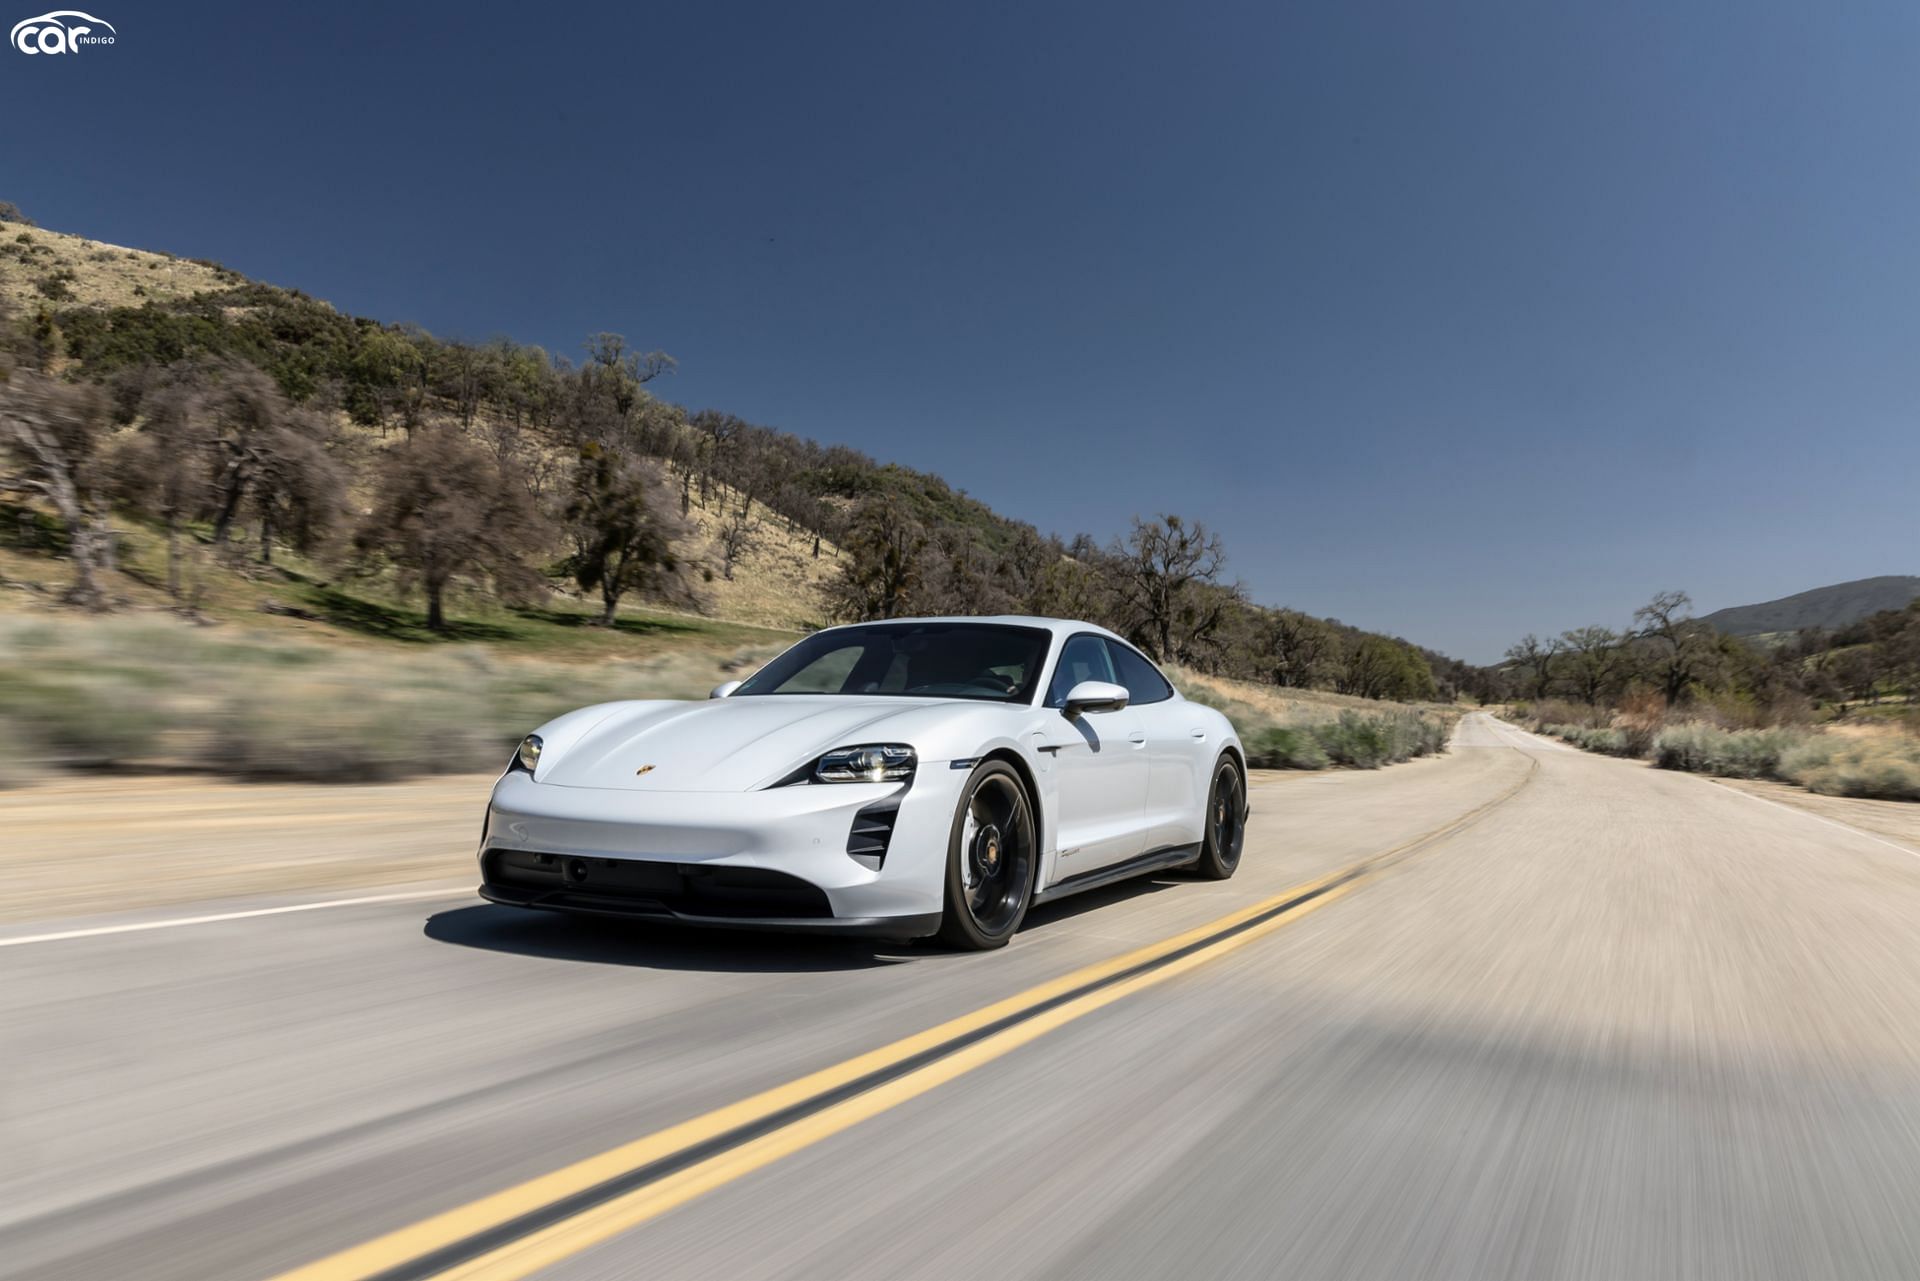 The All Electric Porsche Taycan Outsells Flagship Porsche 911 In The Past Year